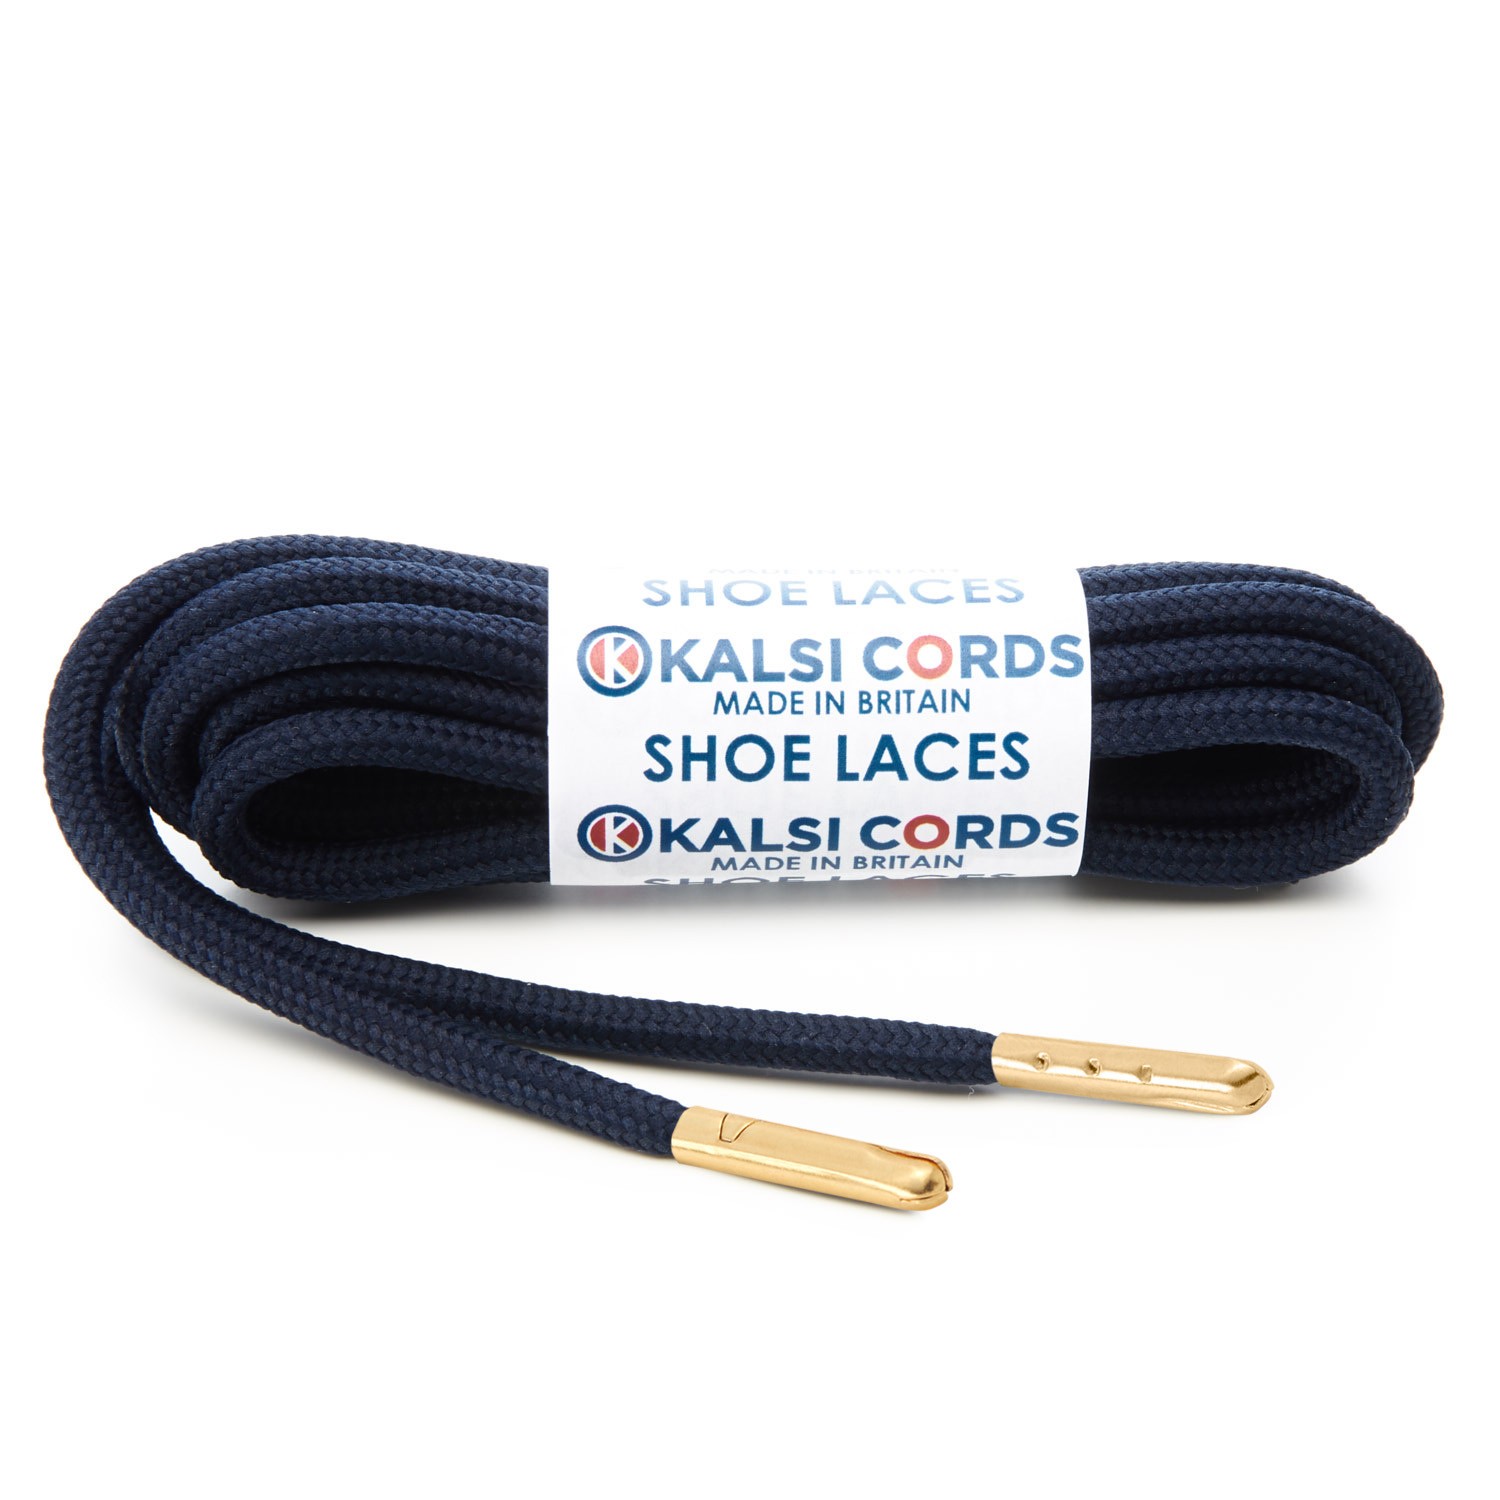 T621 5mm Round Polyester Shoe Laces Dark Navy 1 Gold Metal Tip Kalsi Cords